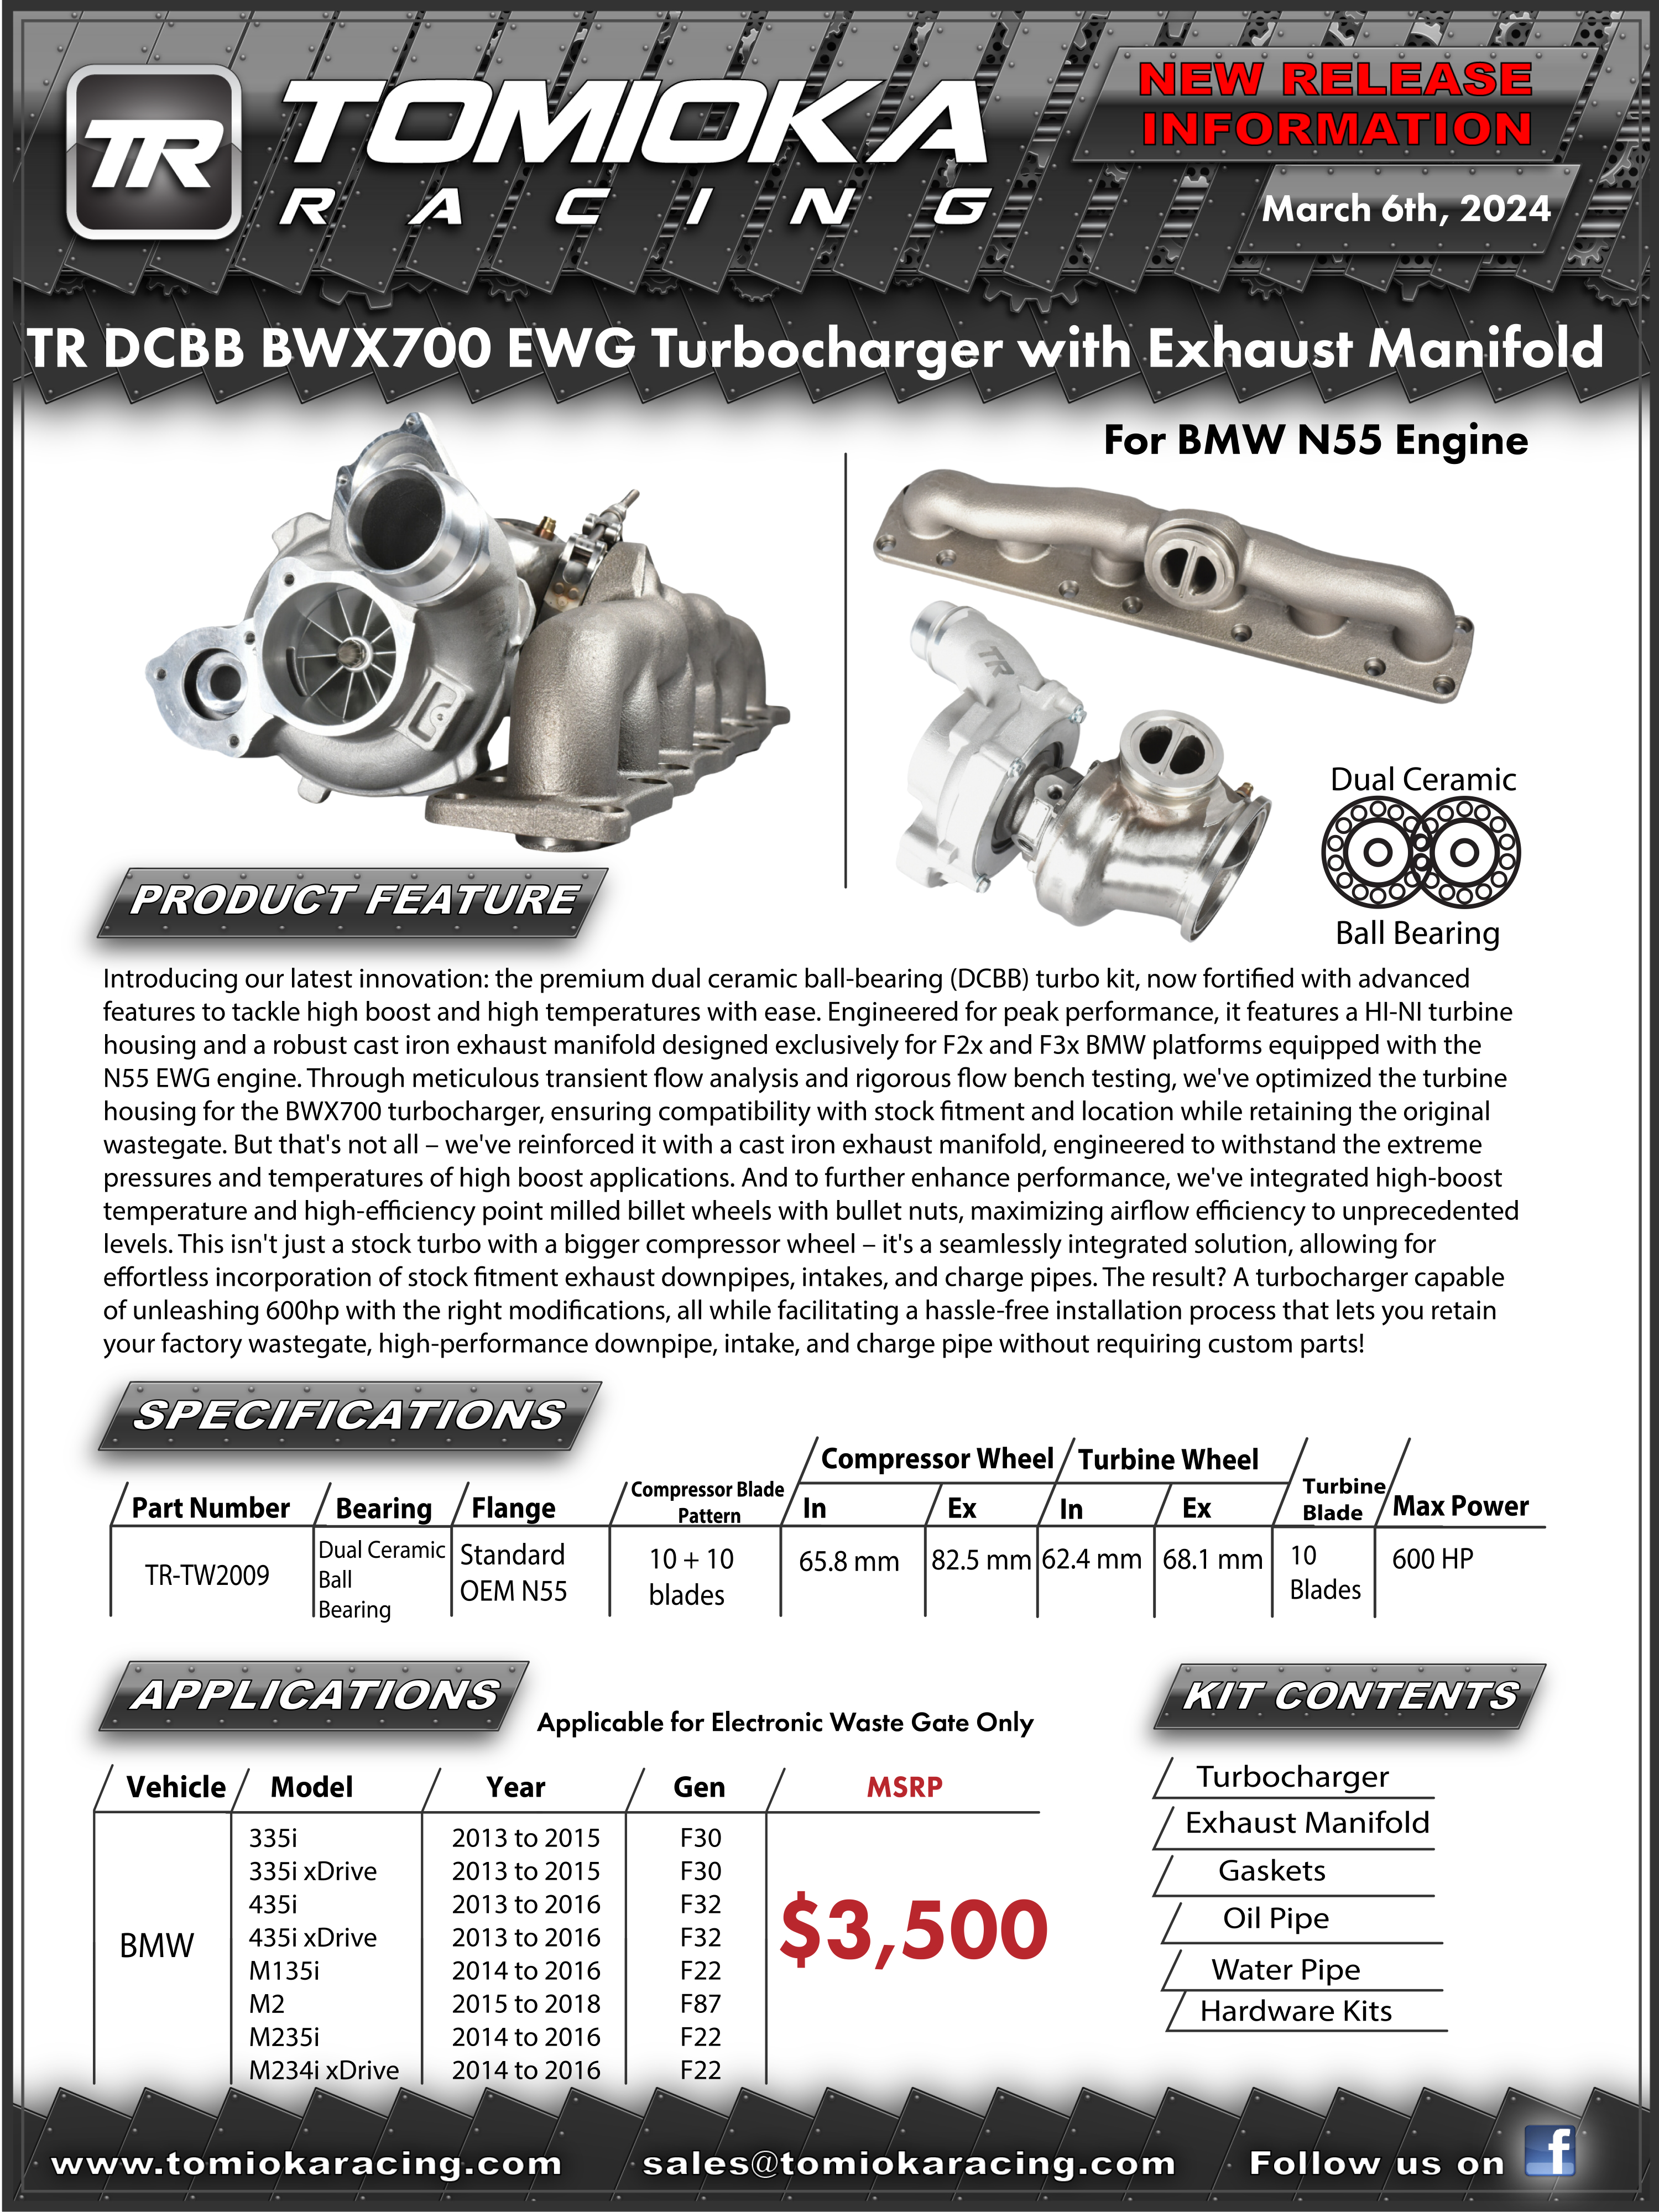 TR TW2009 DCBB BWX700 600HP Turbocharger with Exhaust Manifold for BMW N55 Engine